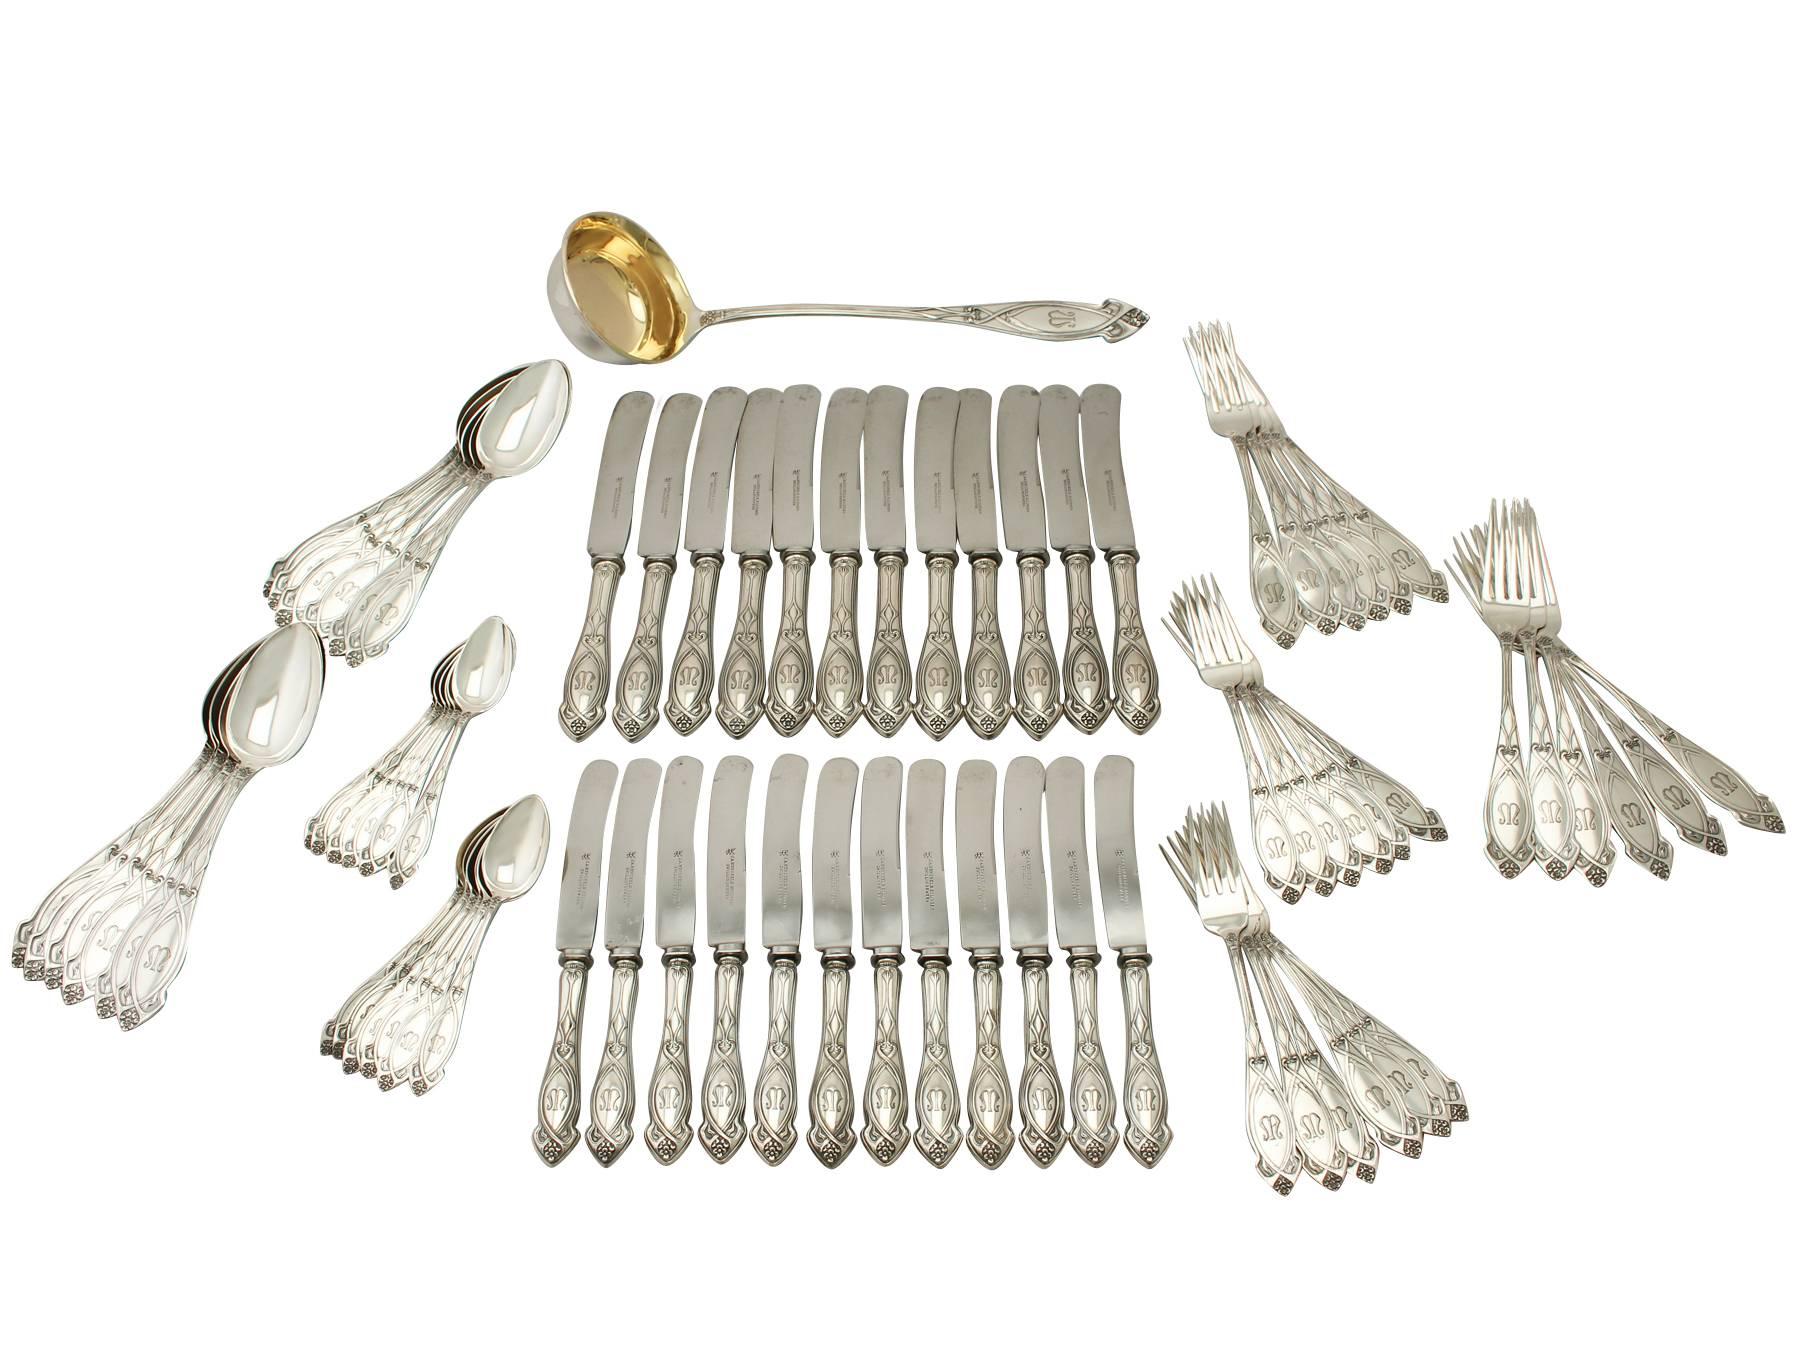 An exceptional, fine and impressive antique German silver flatware service for twelve persons; an addition to our canteen of cutlery collection.

The pieces of this exceptional, antique German cutlery canteen for 12 persons have a rounded form, in